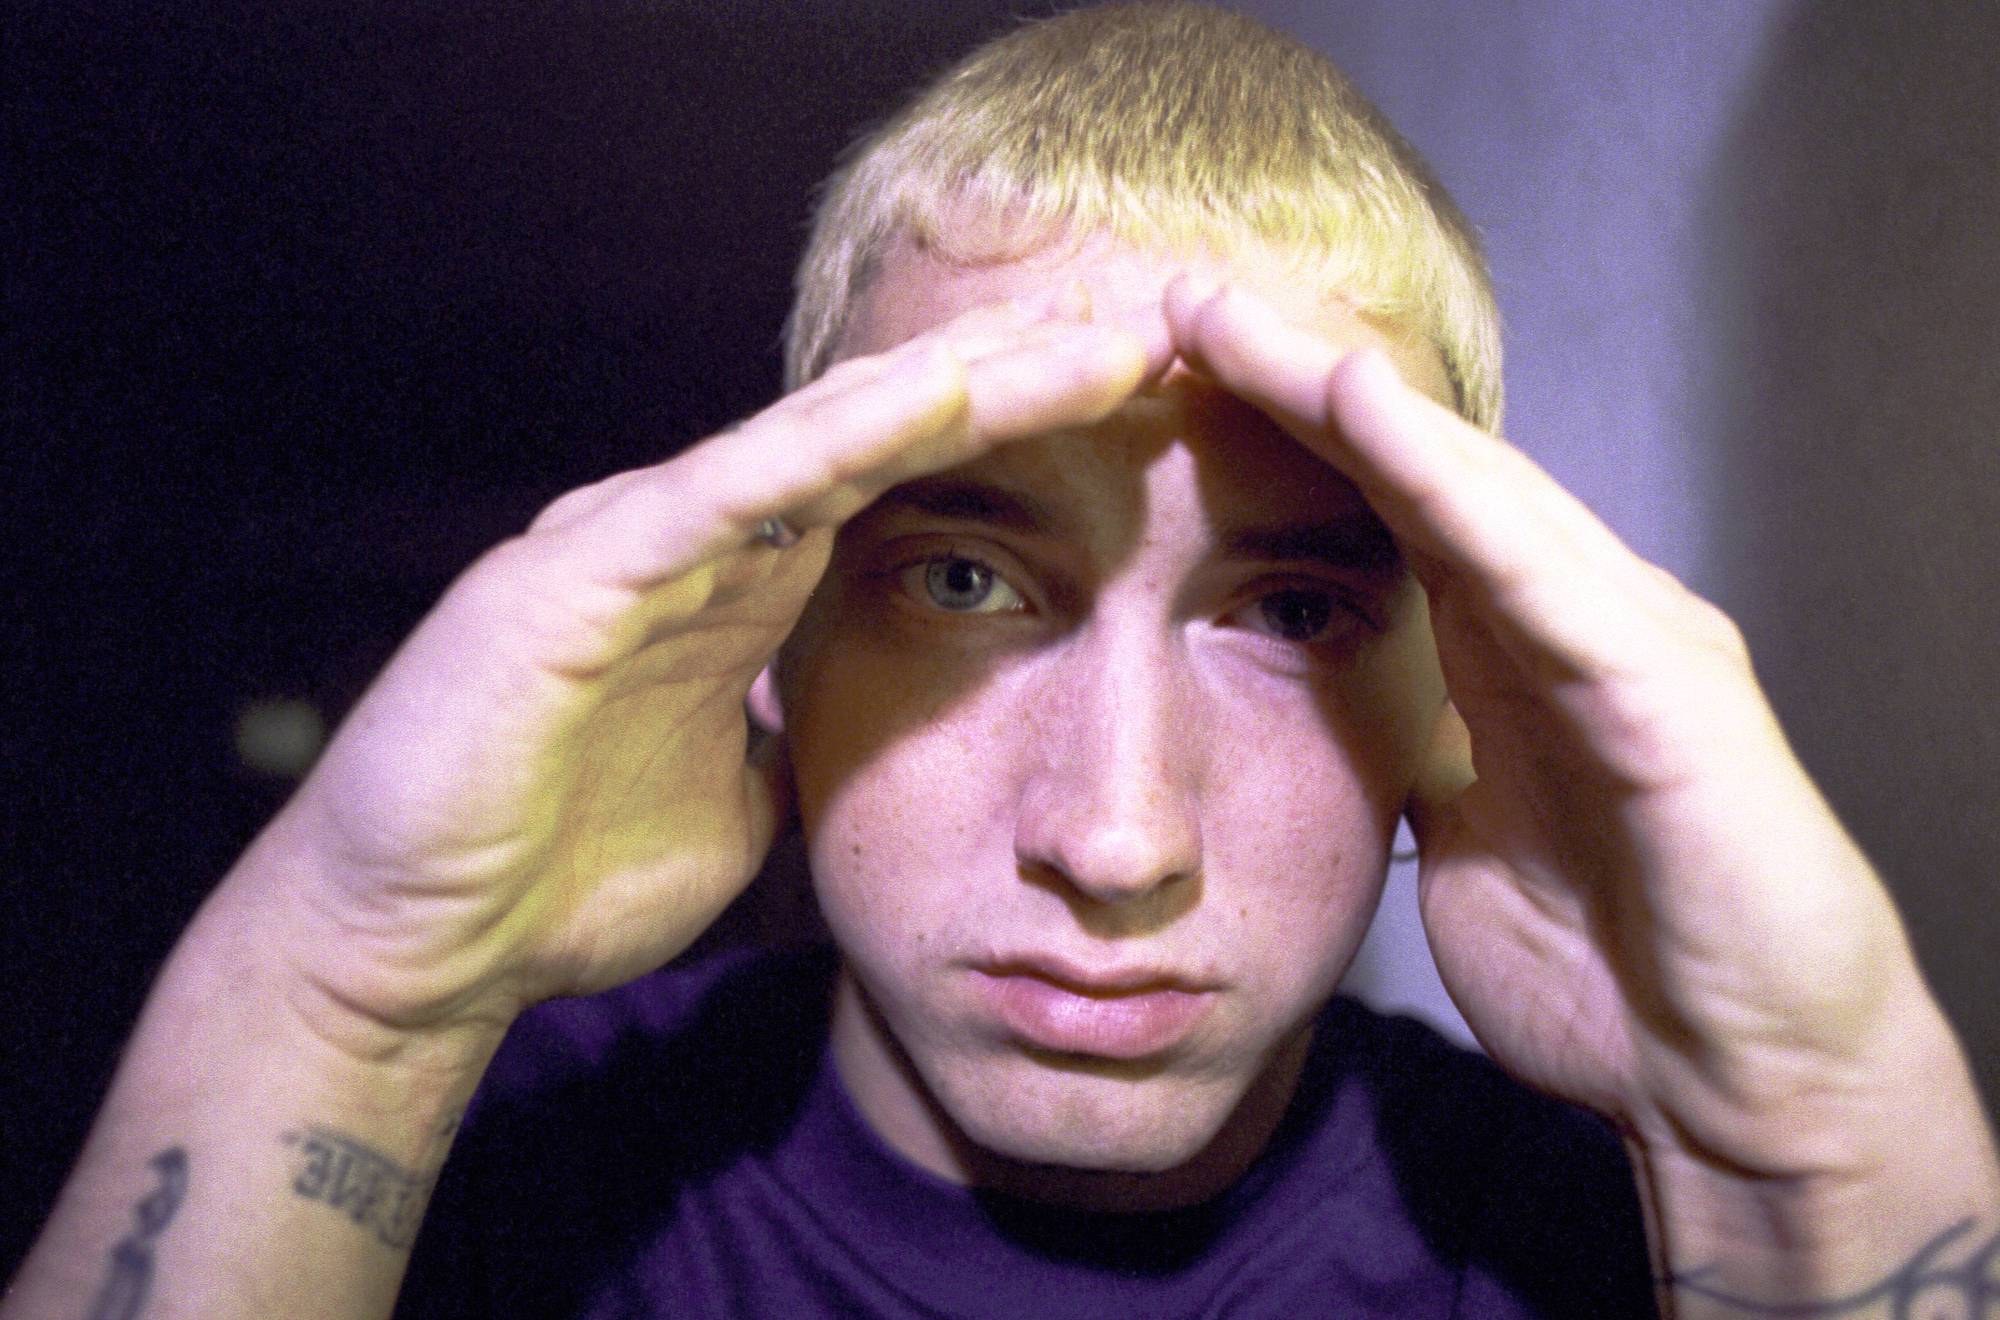 Eminem, who had a tumultuous childhood, posing for a photo